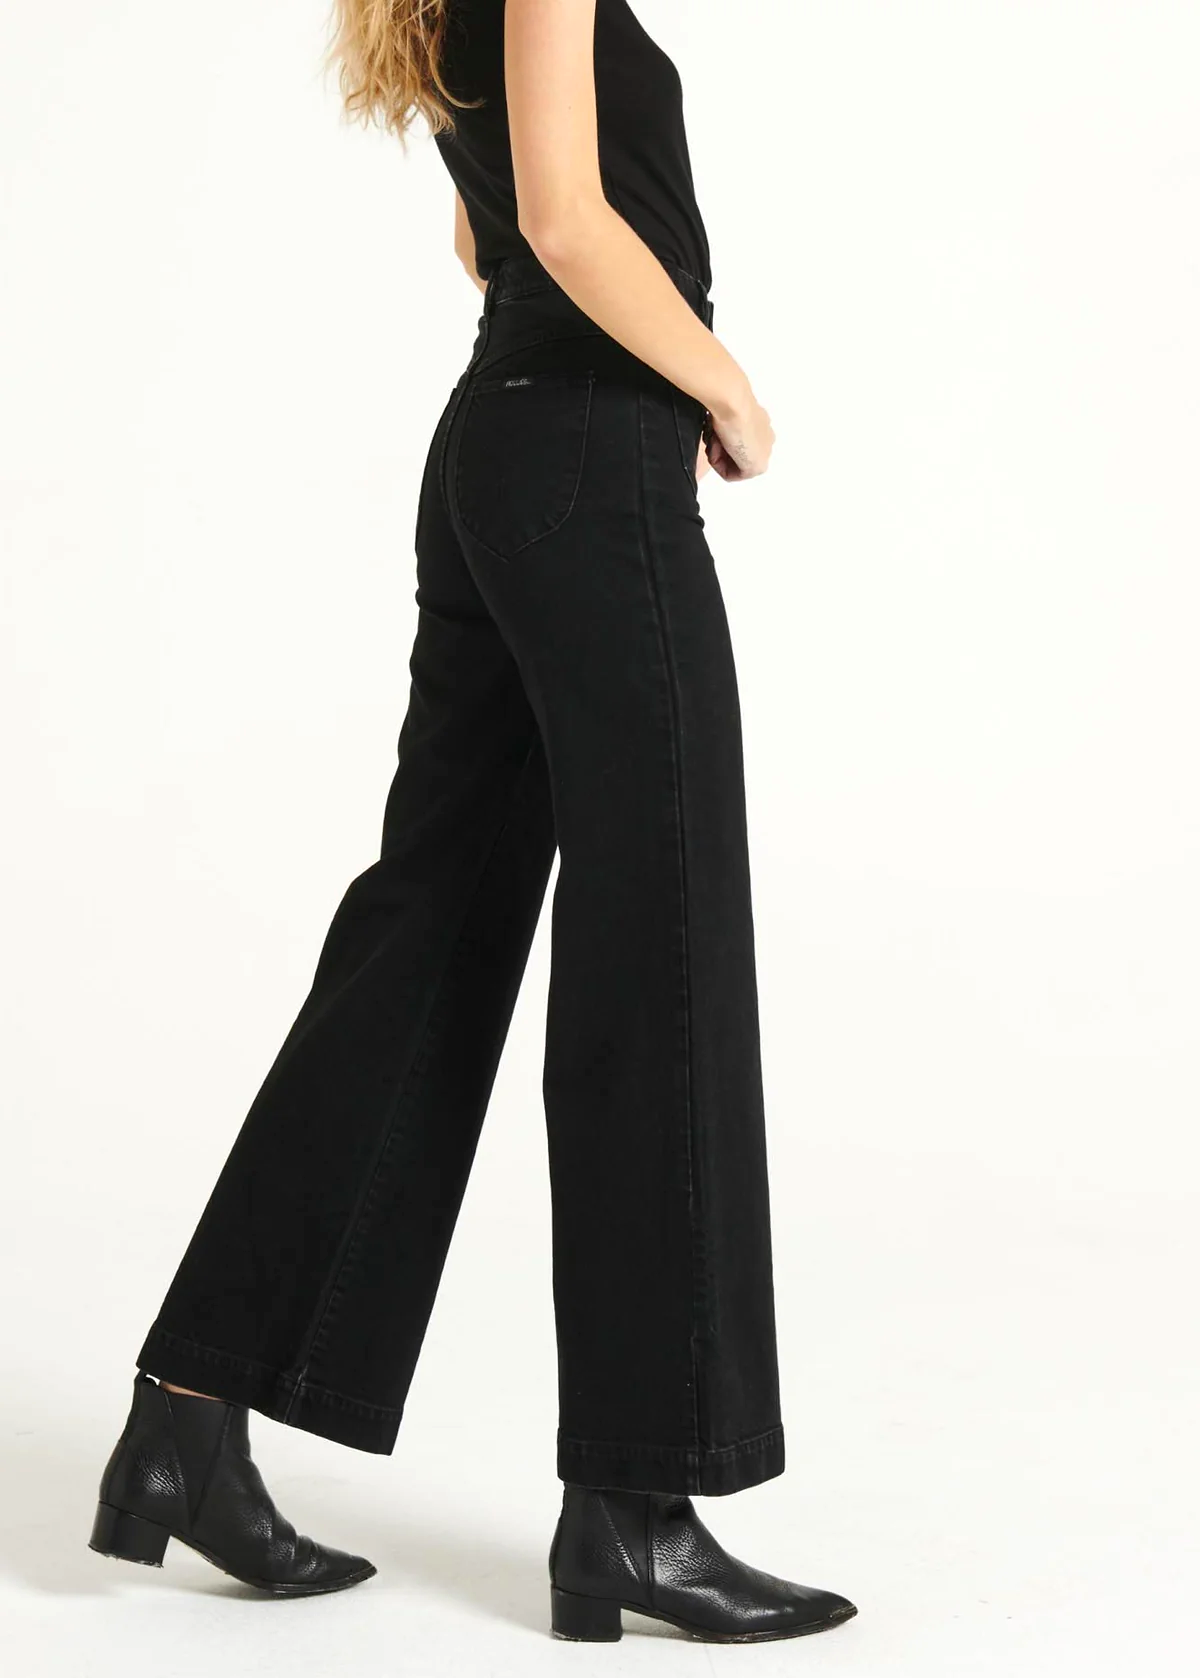 70s inspired Jet Black Stretch Denim Sailor Wide Leg Crop Ankle Length Denim Jean with patch front pockets and high rise waist by Rolla's Jeans